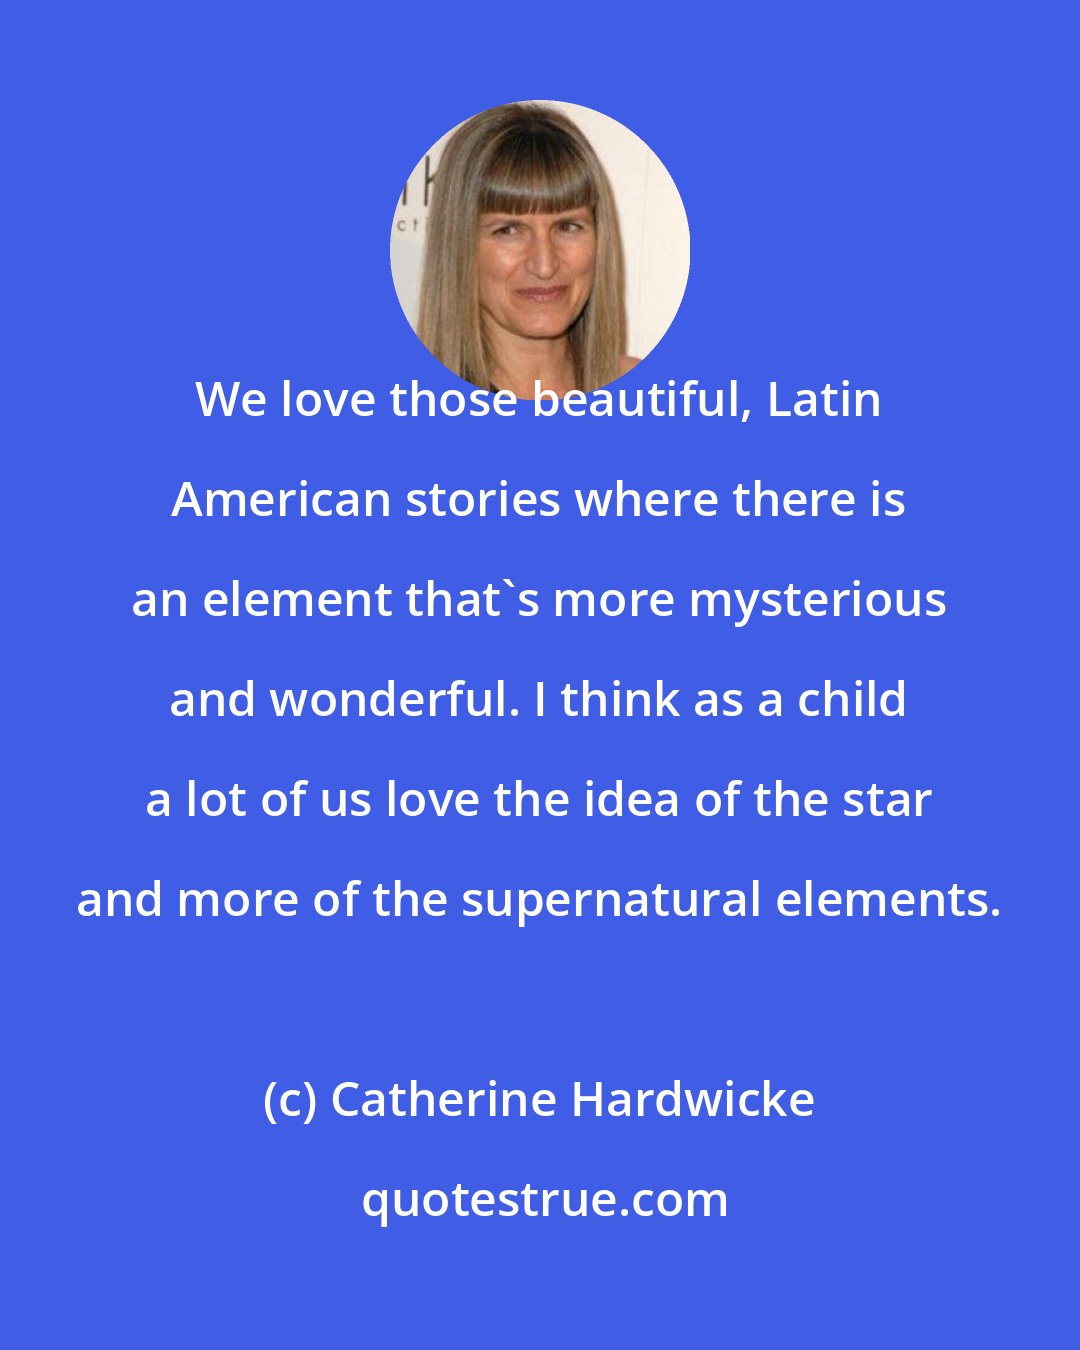 Catherine Hardwicke: We love those beautiful, Latin American stories where there is an element that's more mysterious and wonderful. I think as a child a lot of us love the idea of the star and more of the supernatural elements.